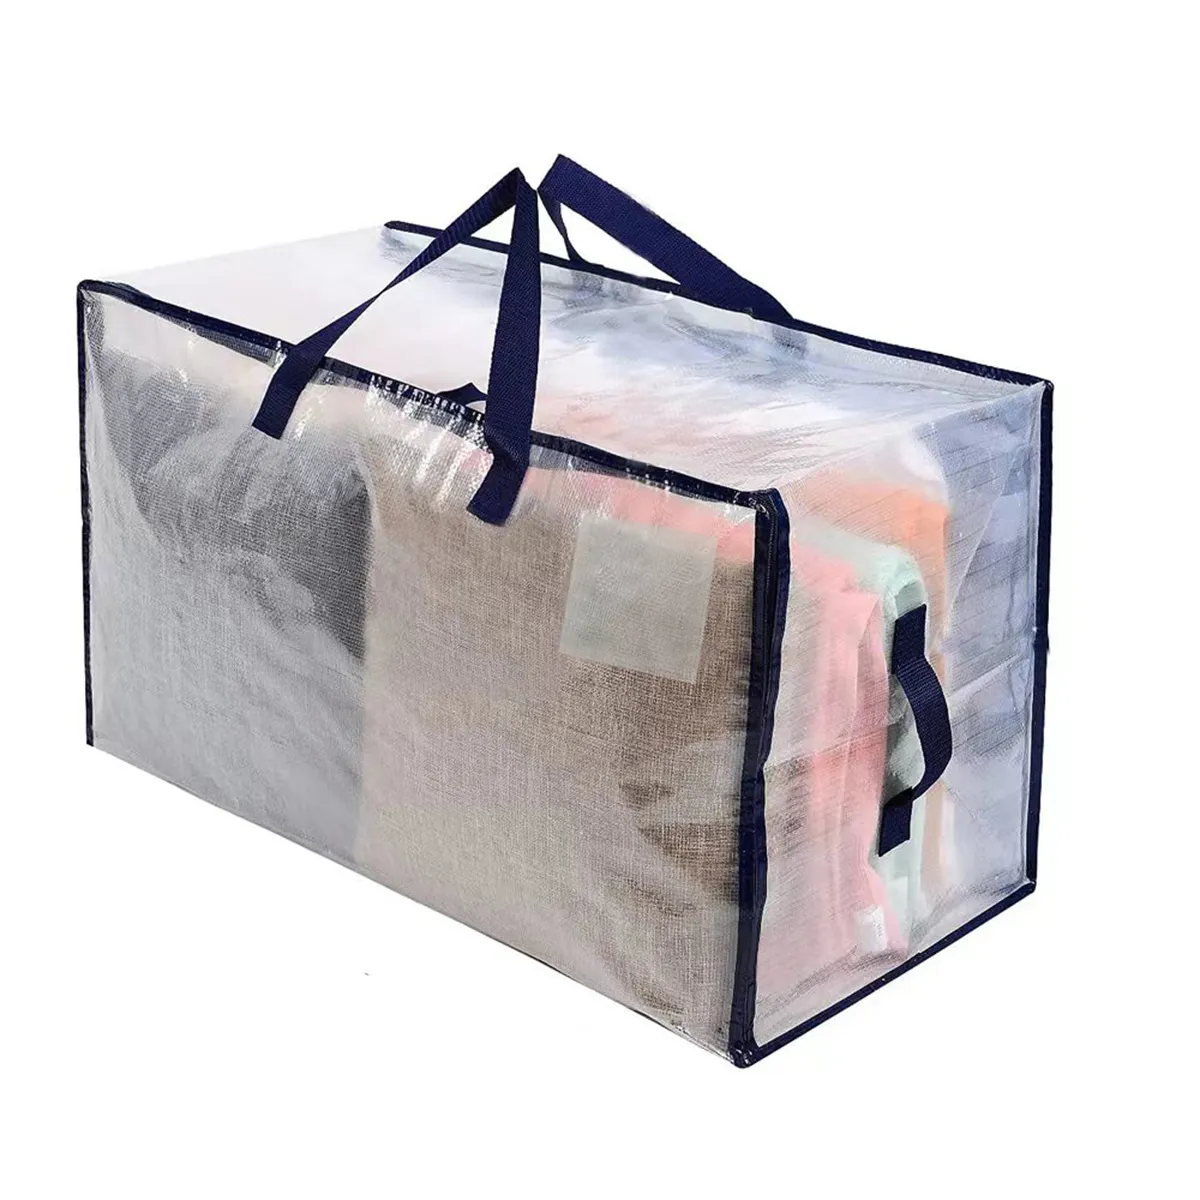 Comforter Storage Bags - Zippered Storage Bags for Blankets